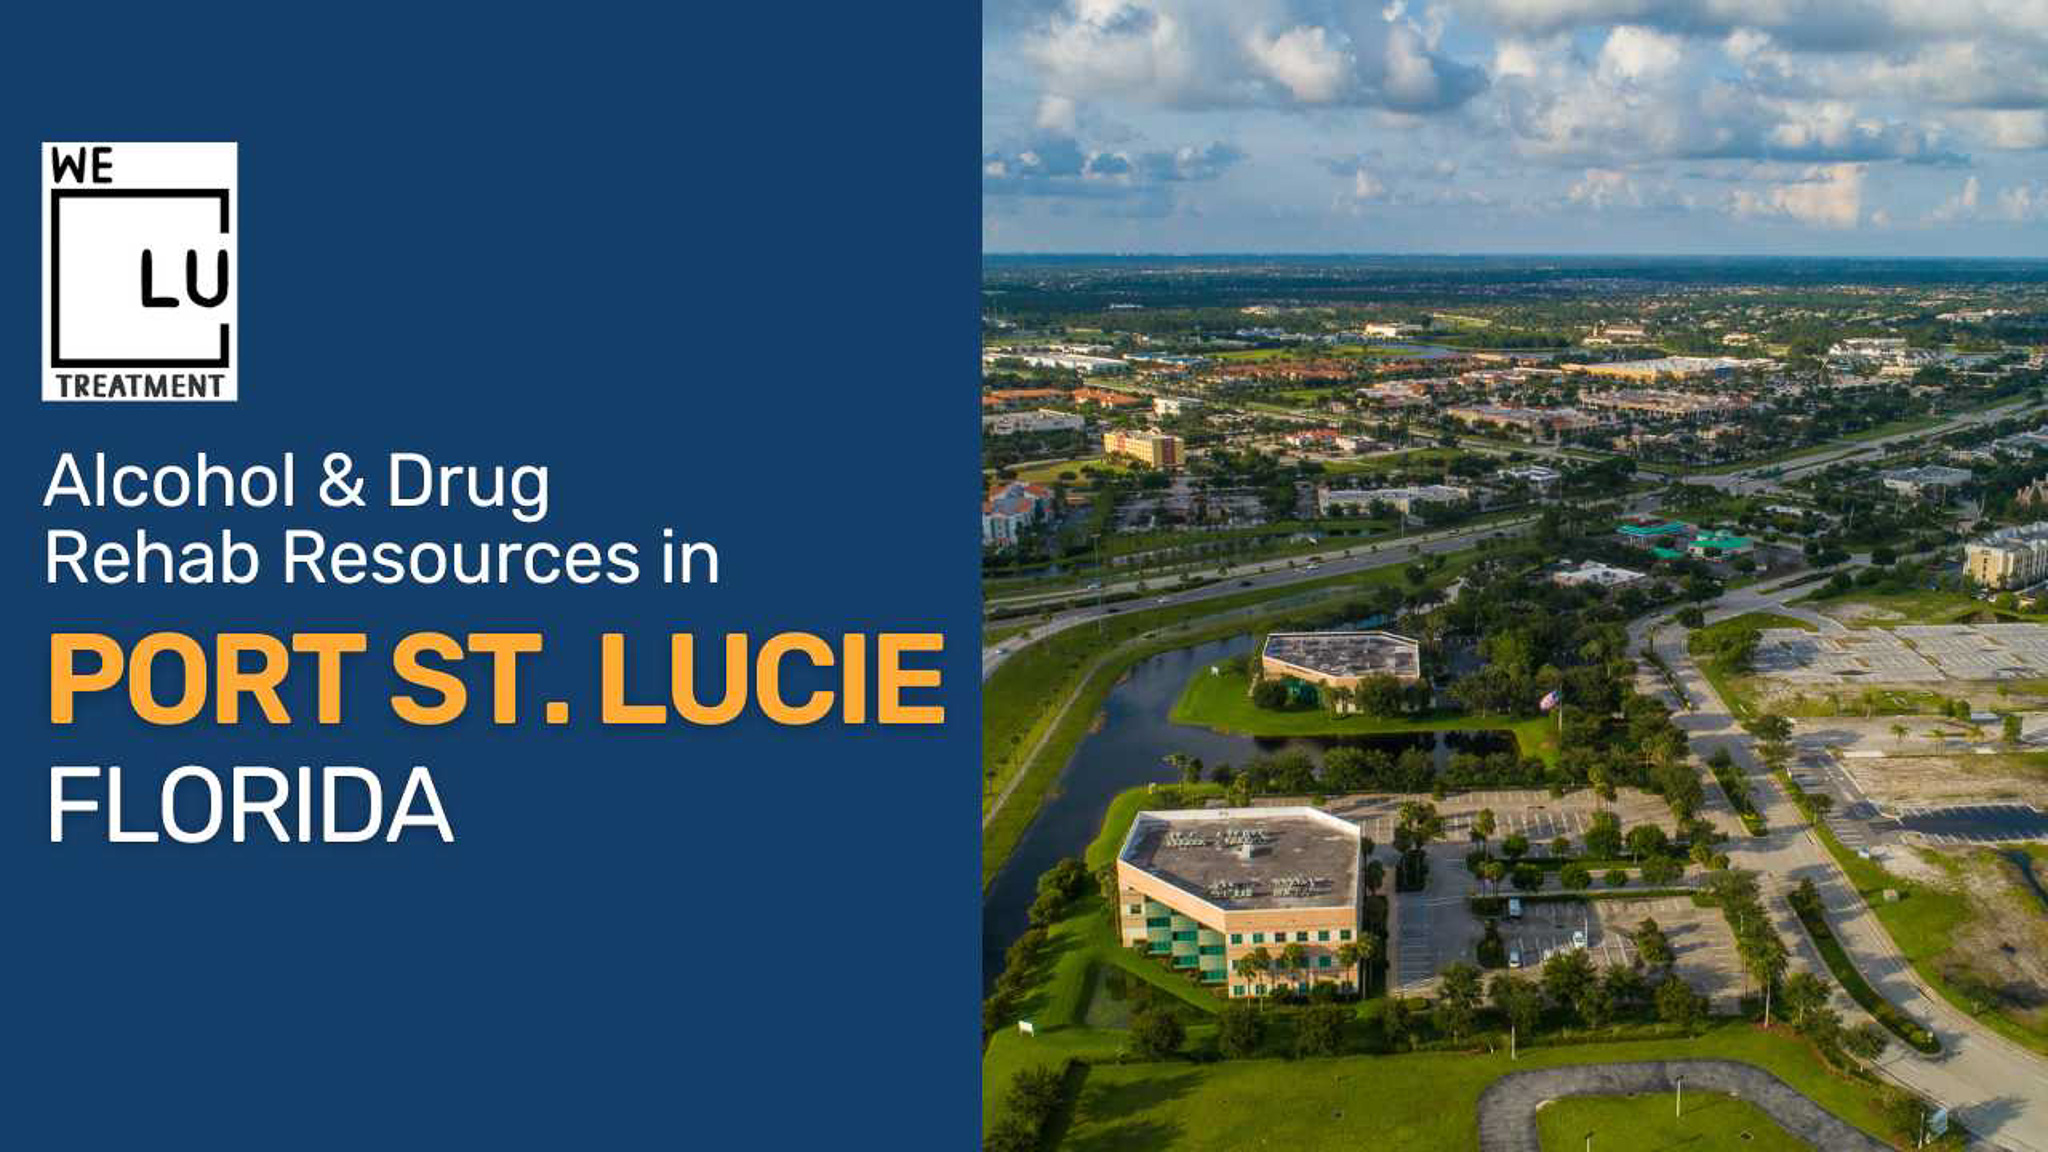 Port St. Lucie FL (SA) We Level Up treatment center for drug and alcohol rehab detox and mental health services - Image 1